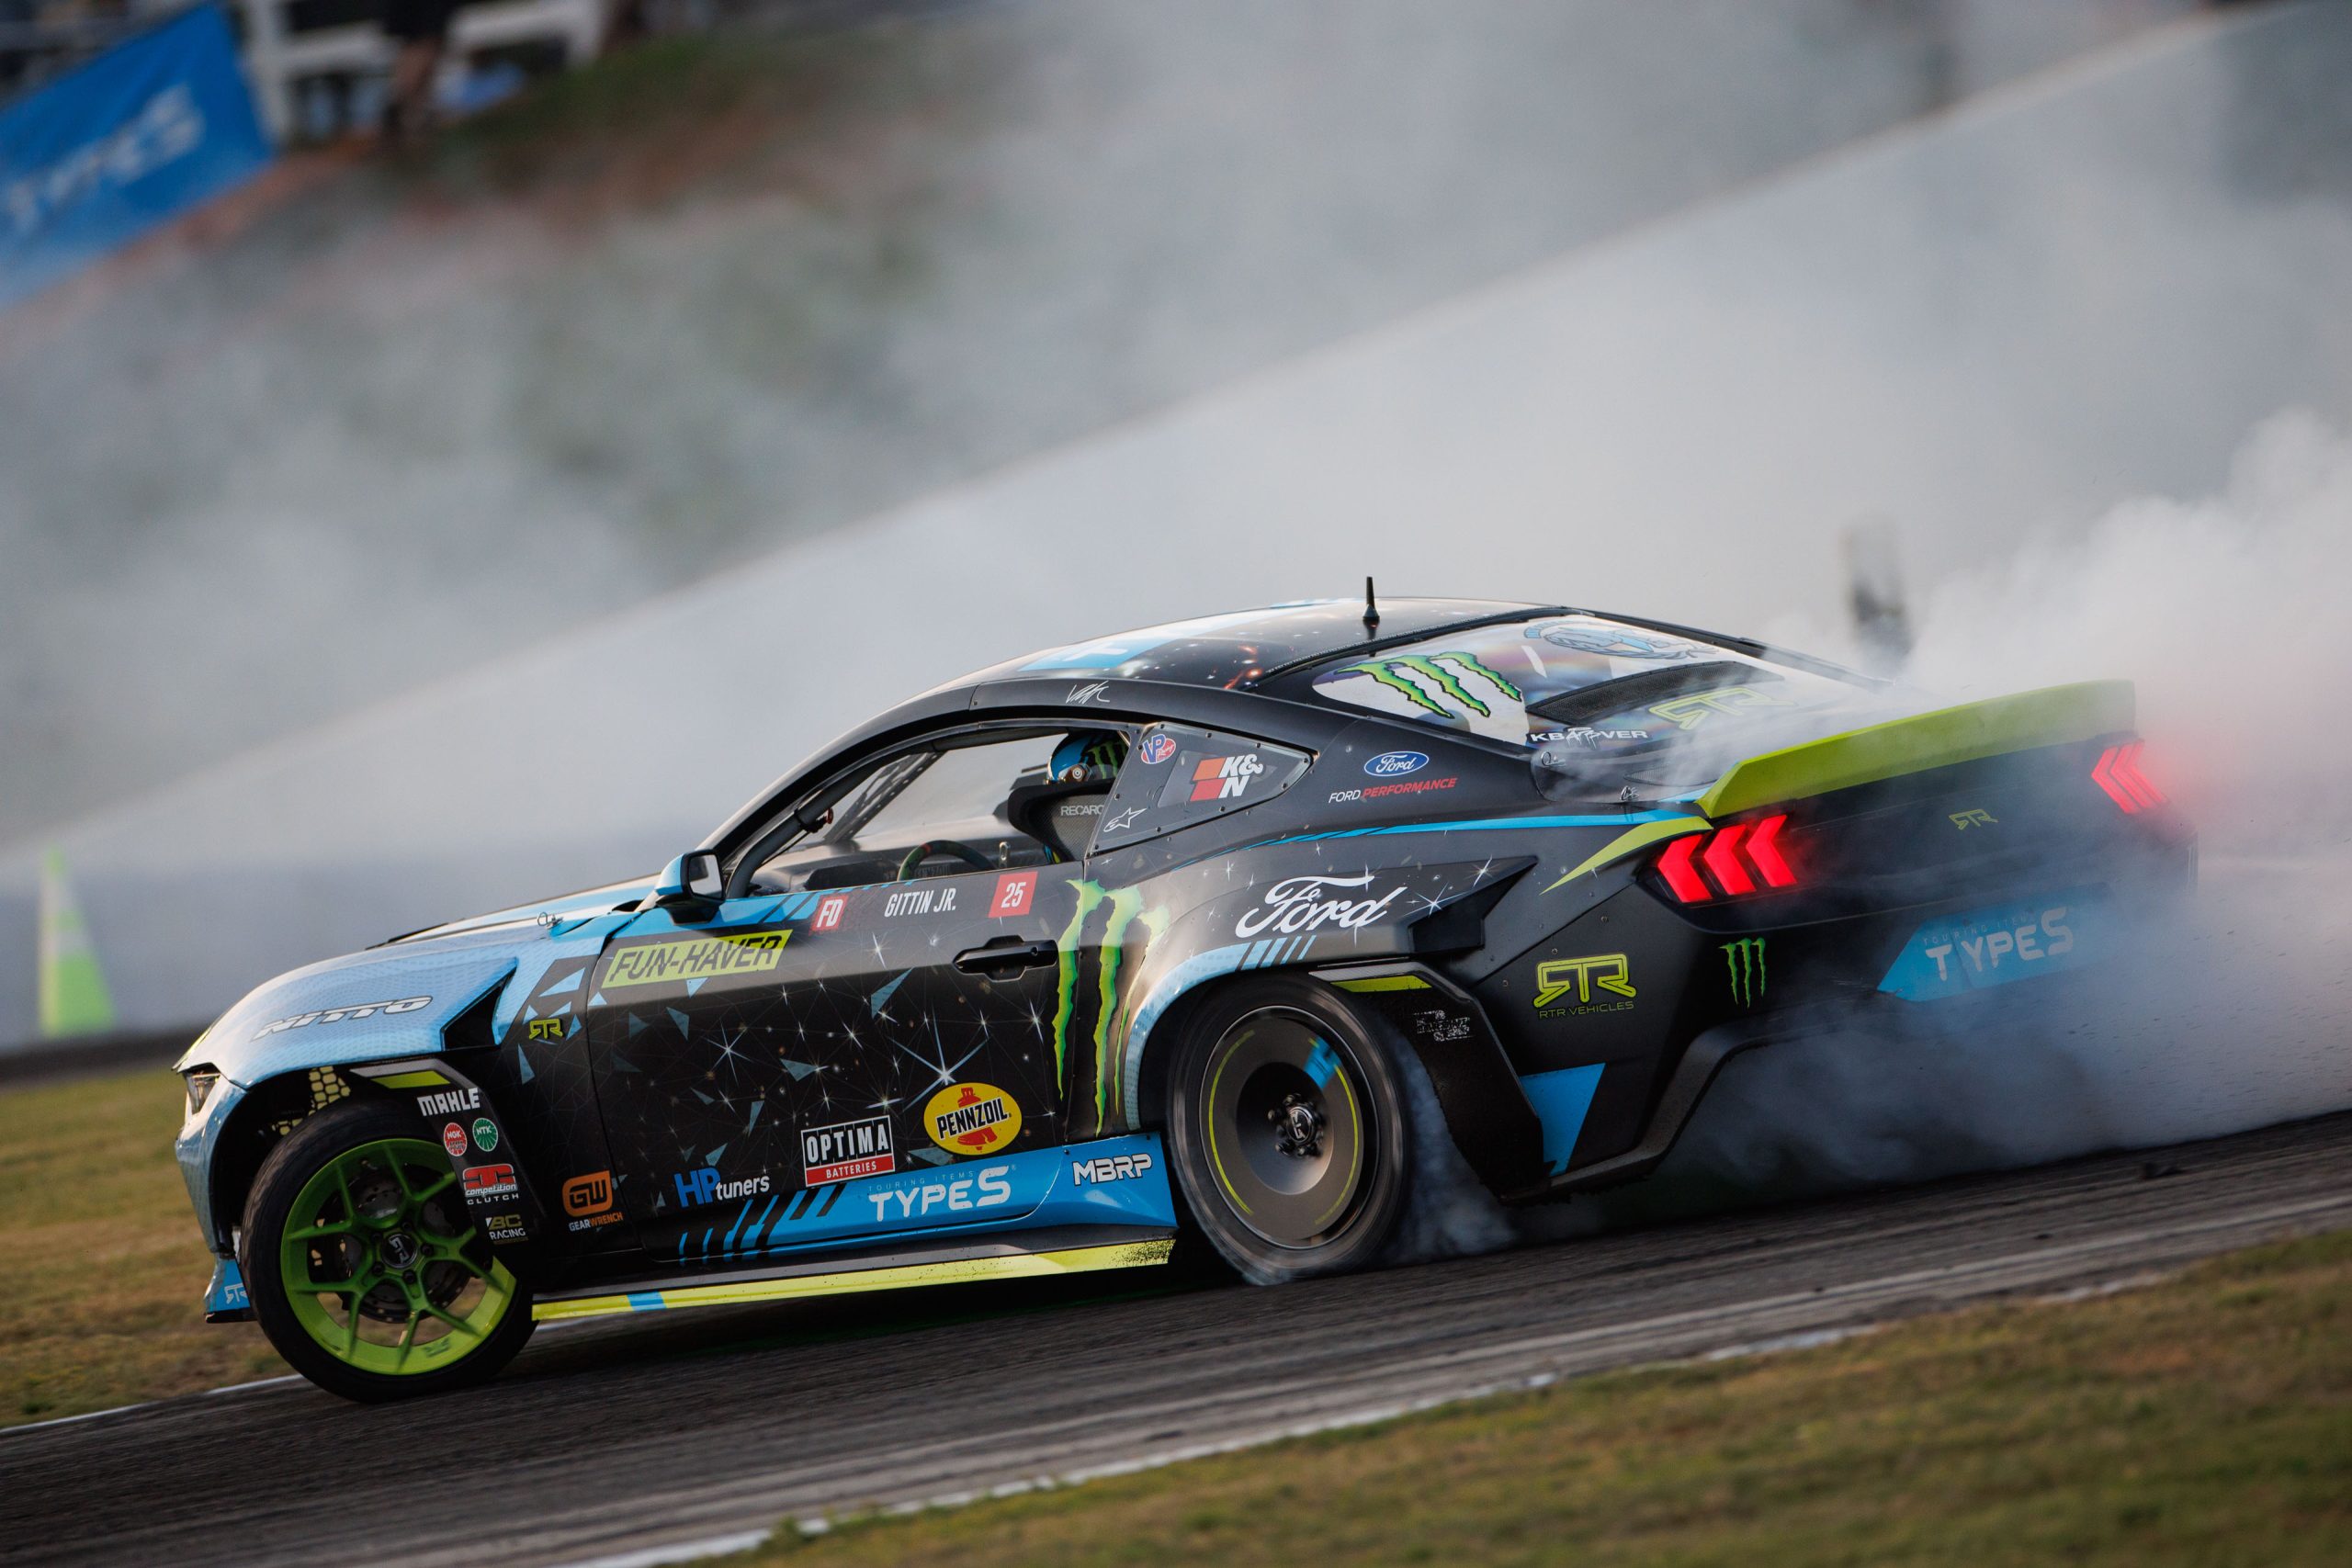 QUALIFYING RESULTS FROM ROUND 2 OF 2023 FORMULA DRIFT PRO AND ROUND 1